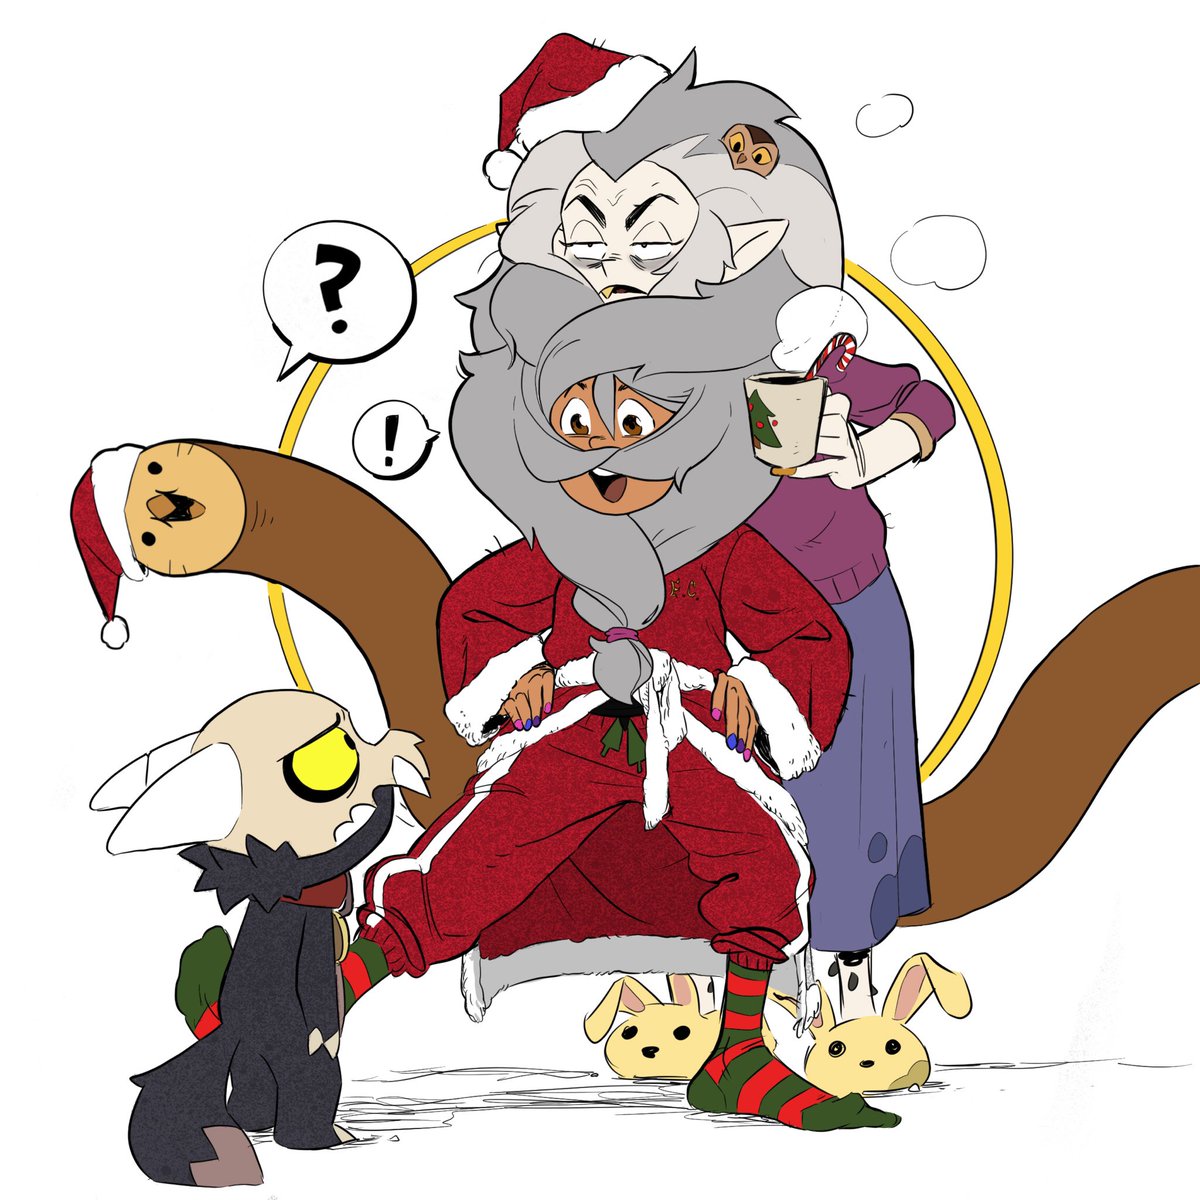 RT @luzscoven: can you believe it guys? christmas just a day away! wohoo #theowlhouse https://t.co/Ofx81DRUXt